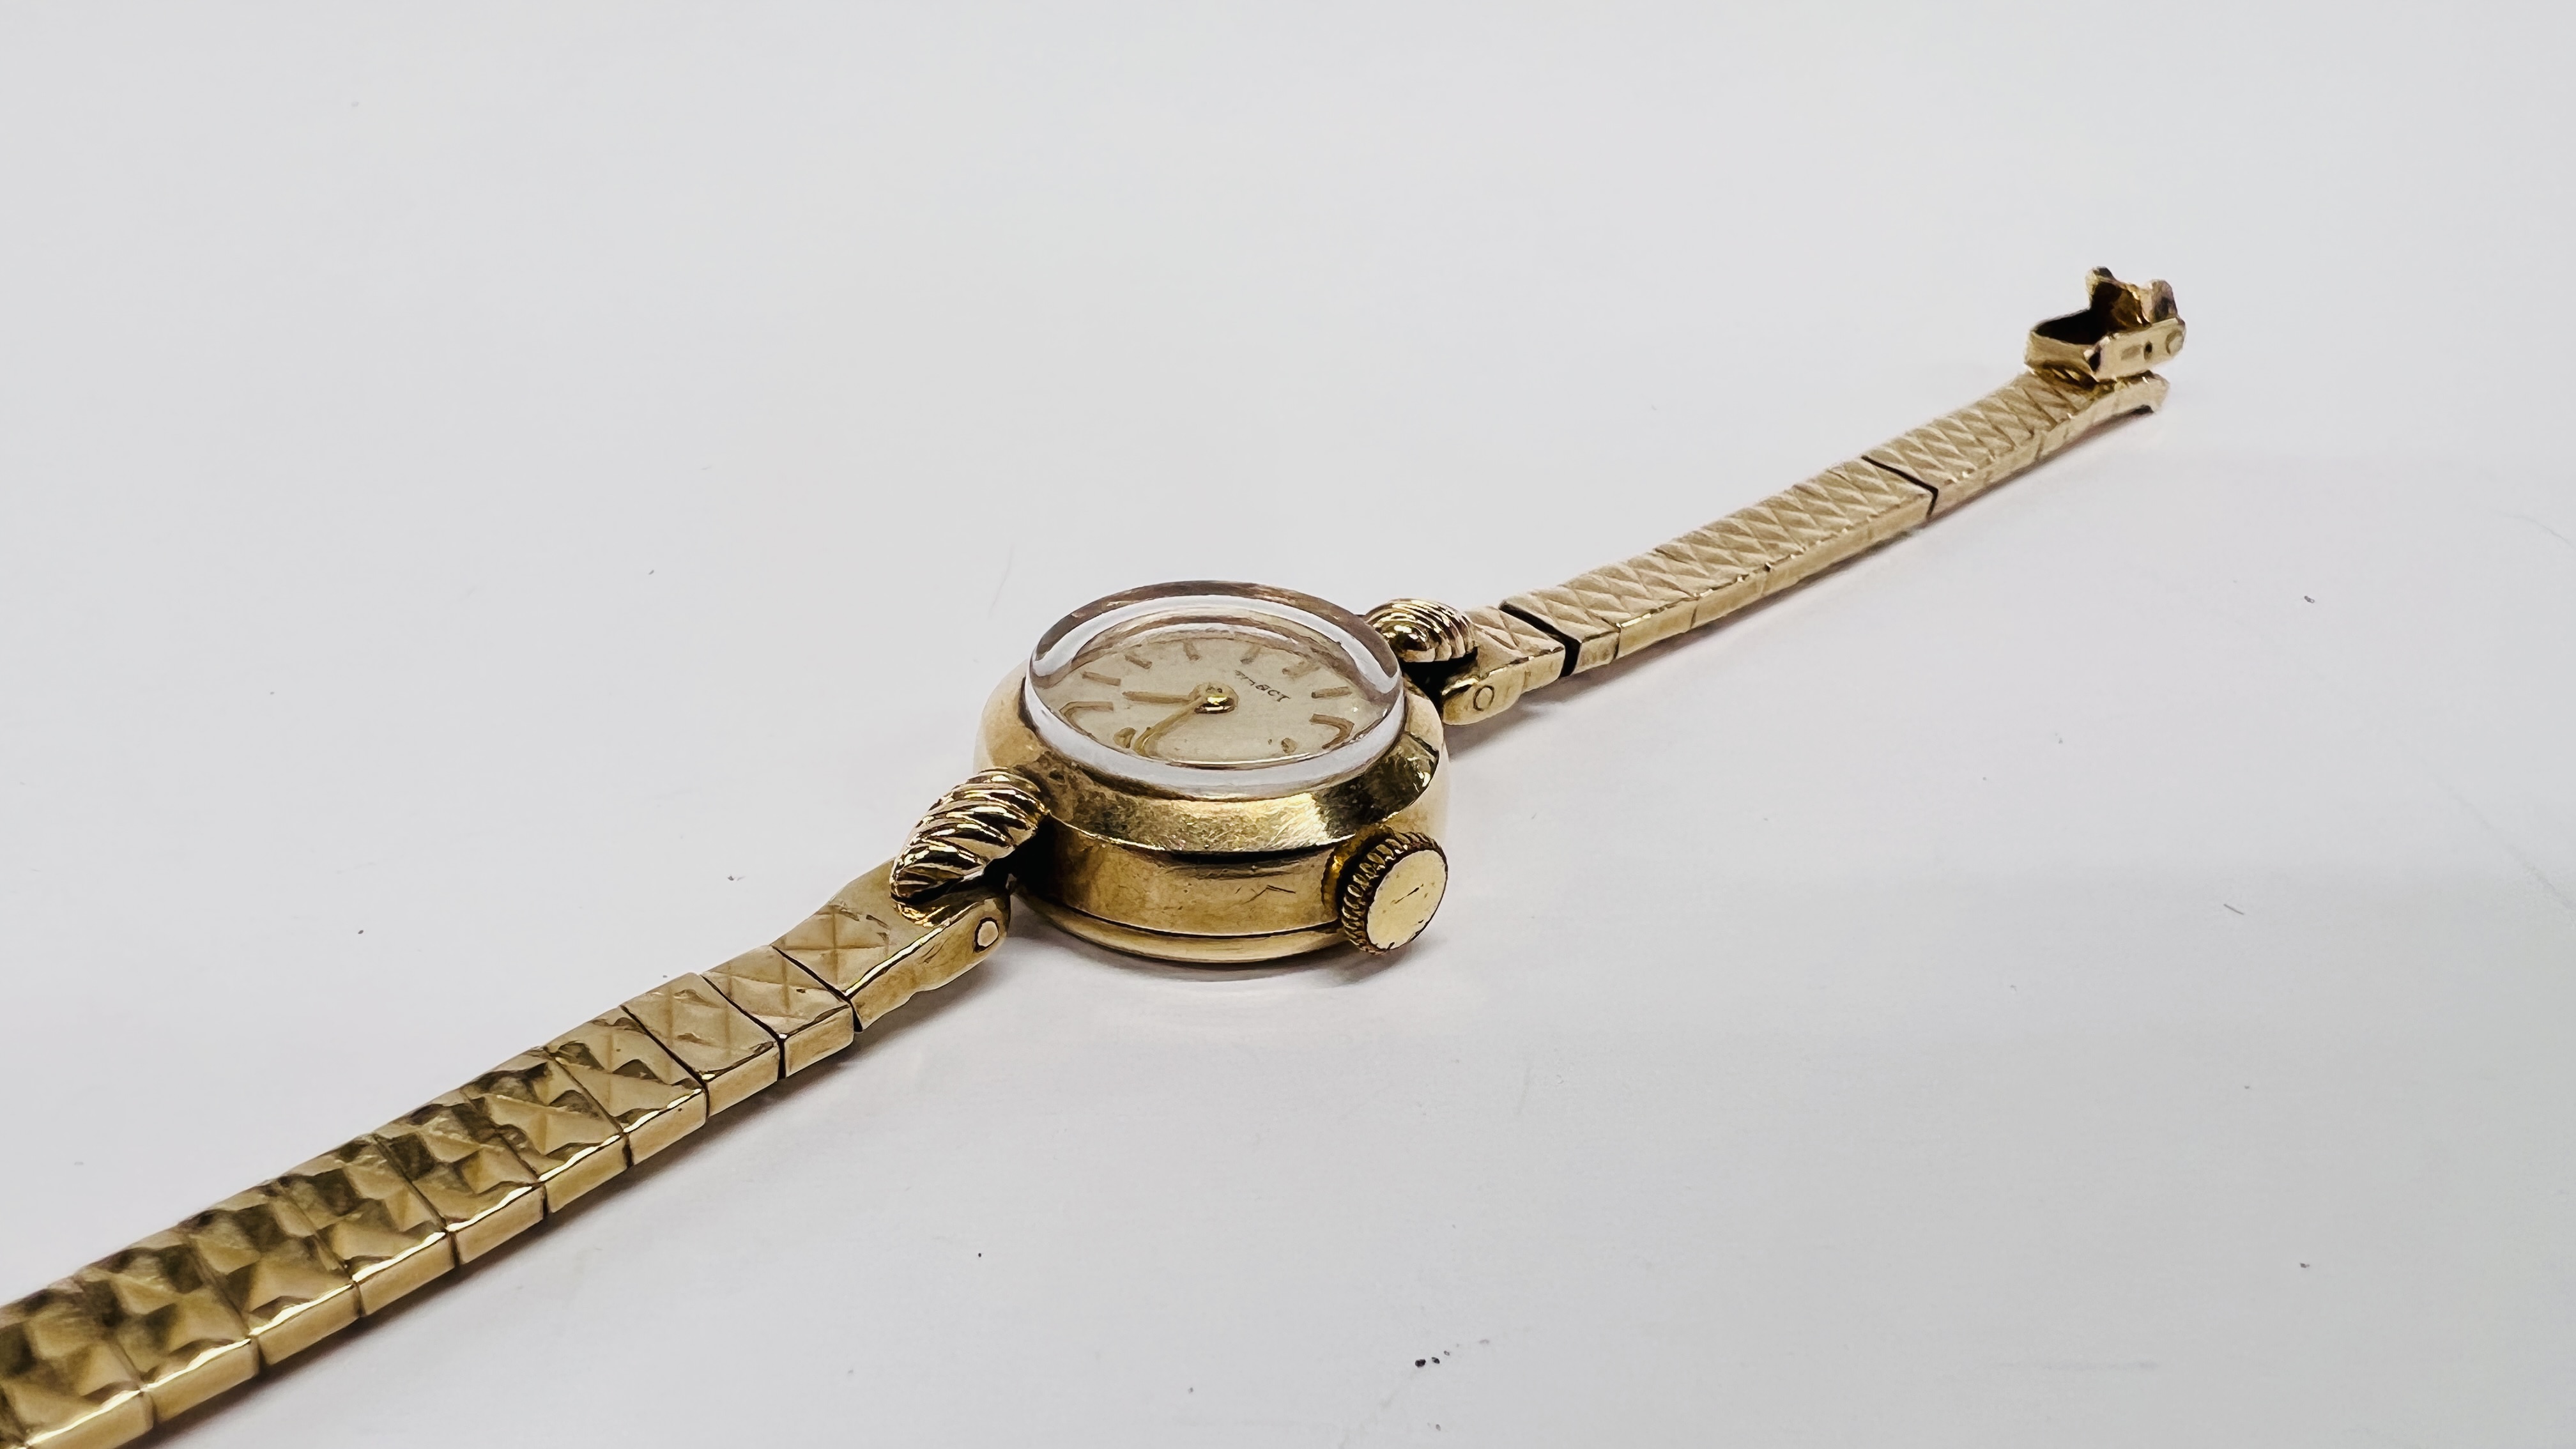 A LADY'S 9CT GOLD TISSOT WRISTWATCH WITH BATON NUMERALS, ON A 9CT GOLD BRACELET. - Image 6 of 13